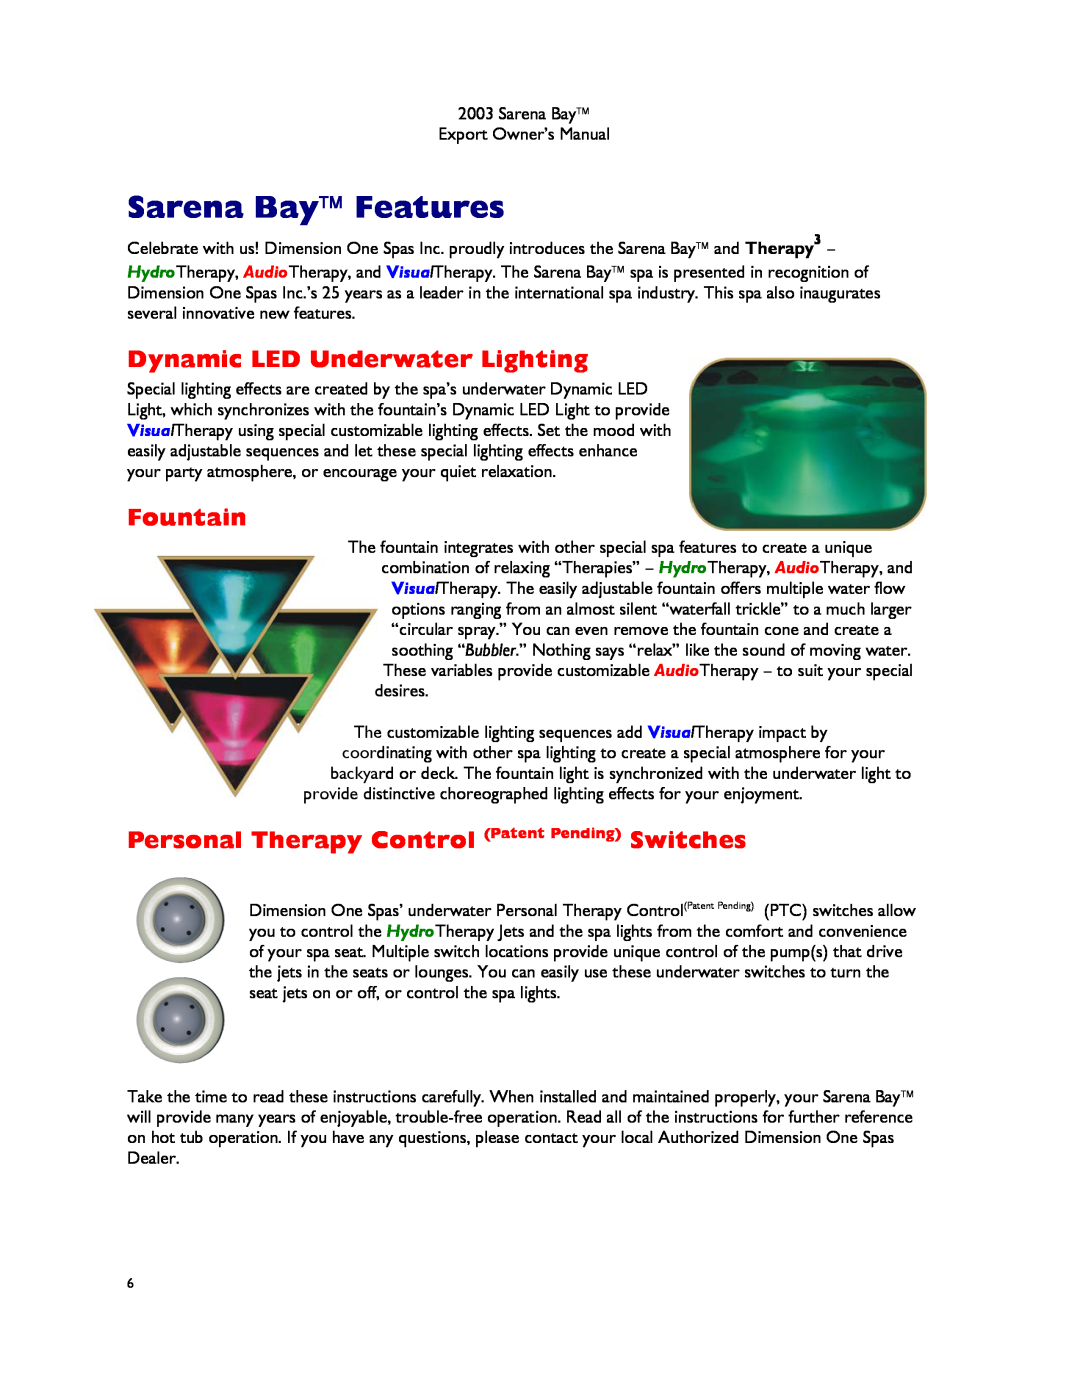 Dimension One Spas manual Sarena Bay Features, Dynamic LED Underwater Lighting, Fountain 